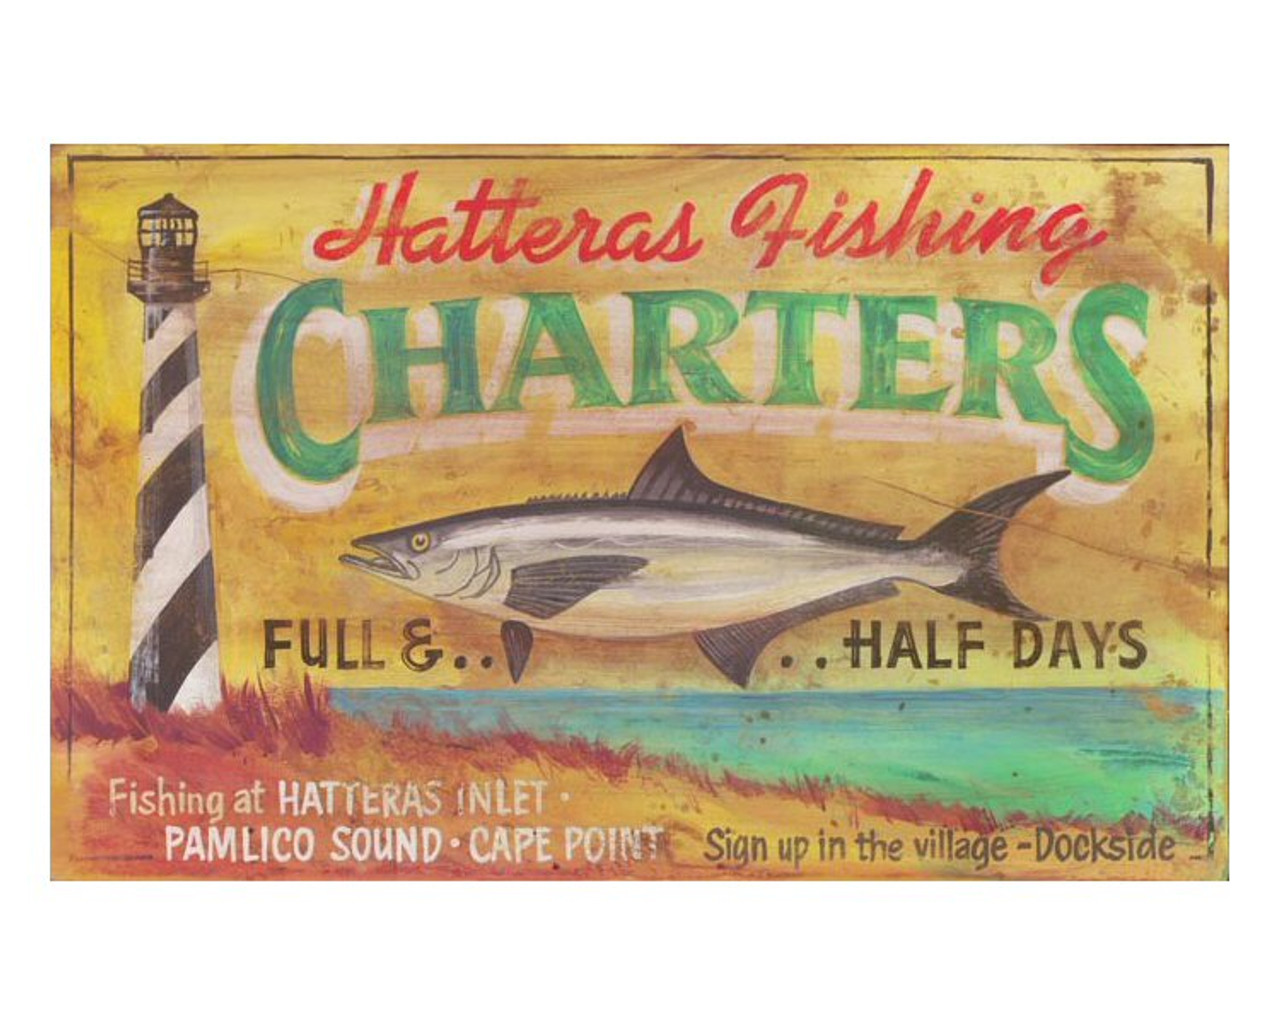 https://cdn11.bigcommerce.com/s-oo0gdojvjo/images/stencil/1280x1280/products/29053/38903/pp-m1043-custom-hatteras-fishing-charters-vintage-style-metal-sign-red-horse-signs__72922.1538041106.jpg?c=2